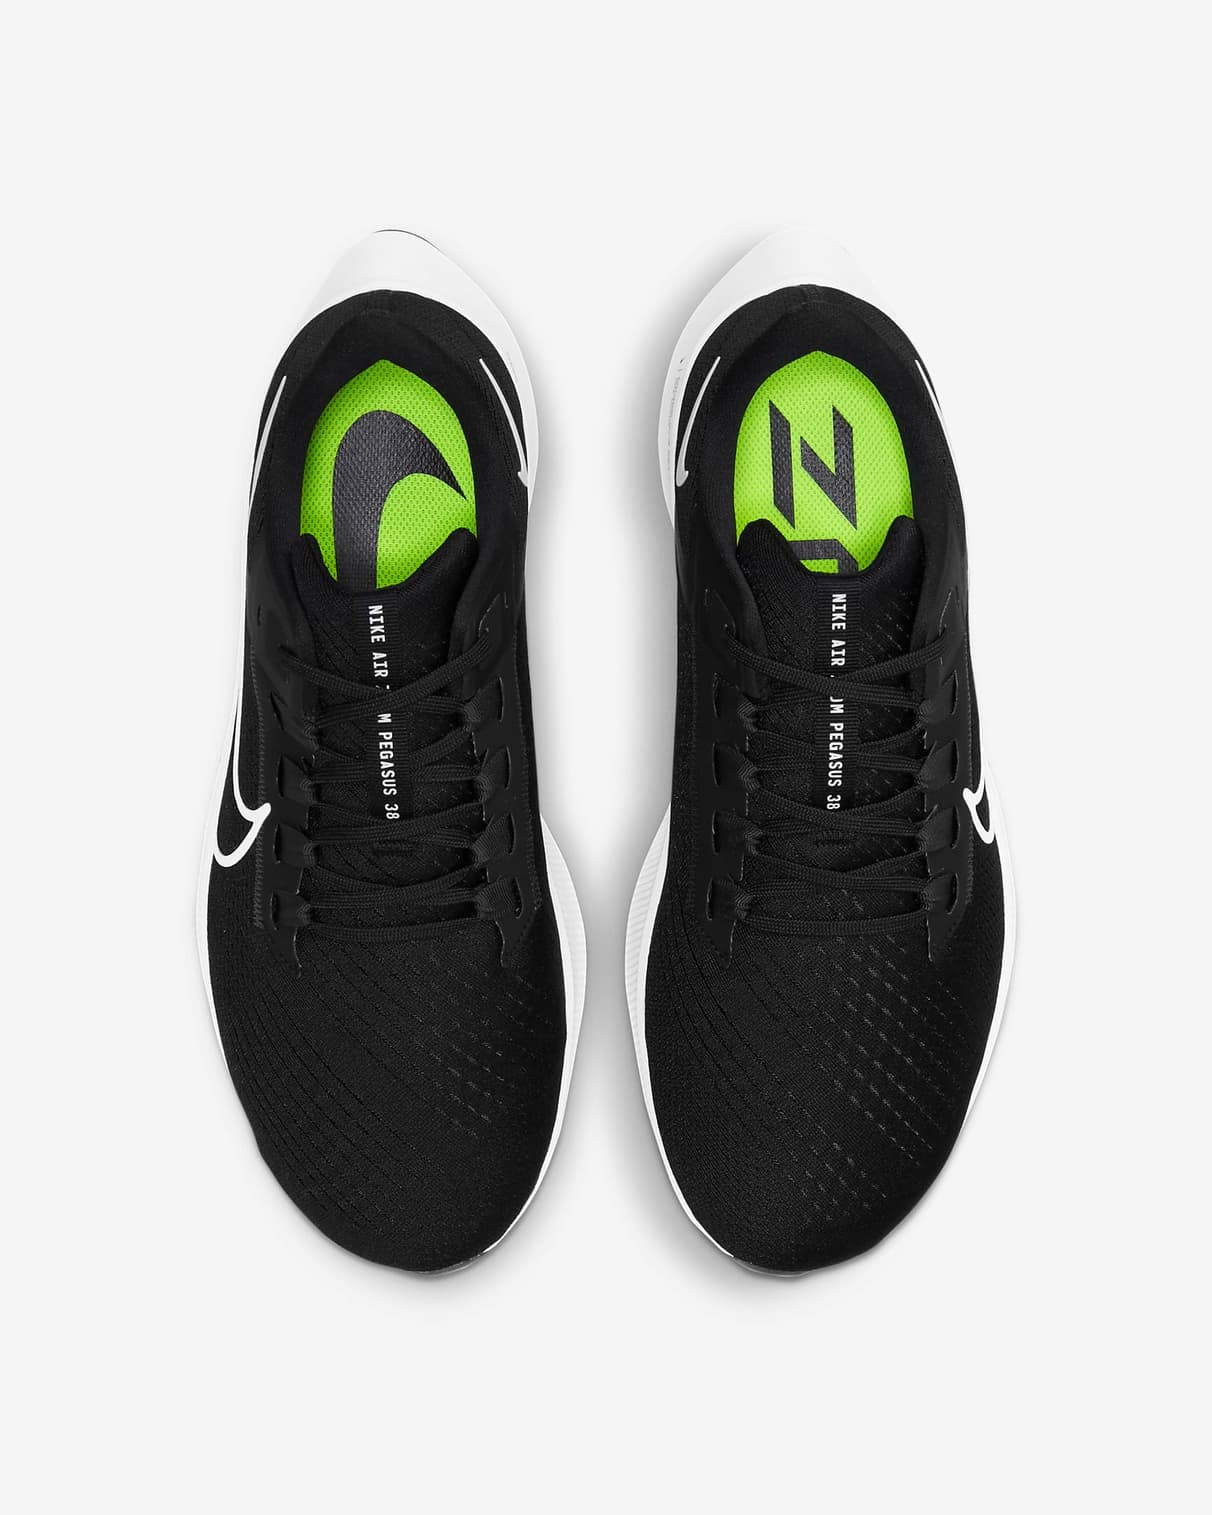 How to Find the Best Shoes for Wide Feet. Nike NL